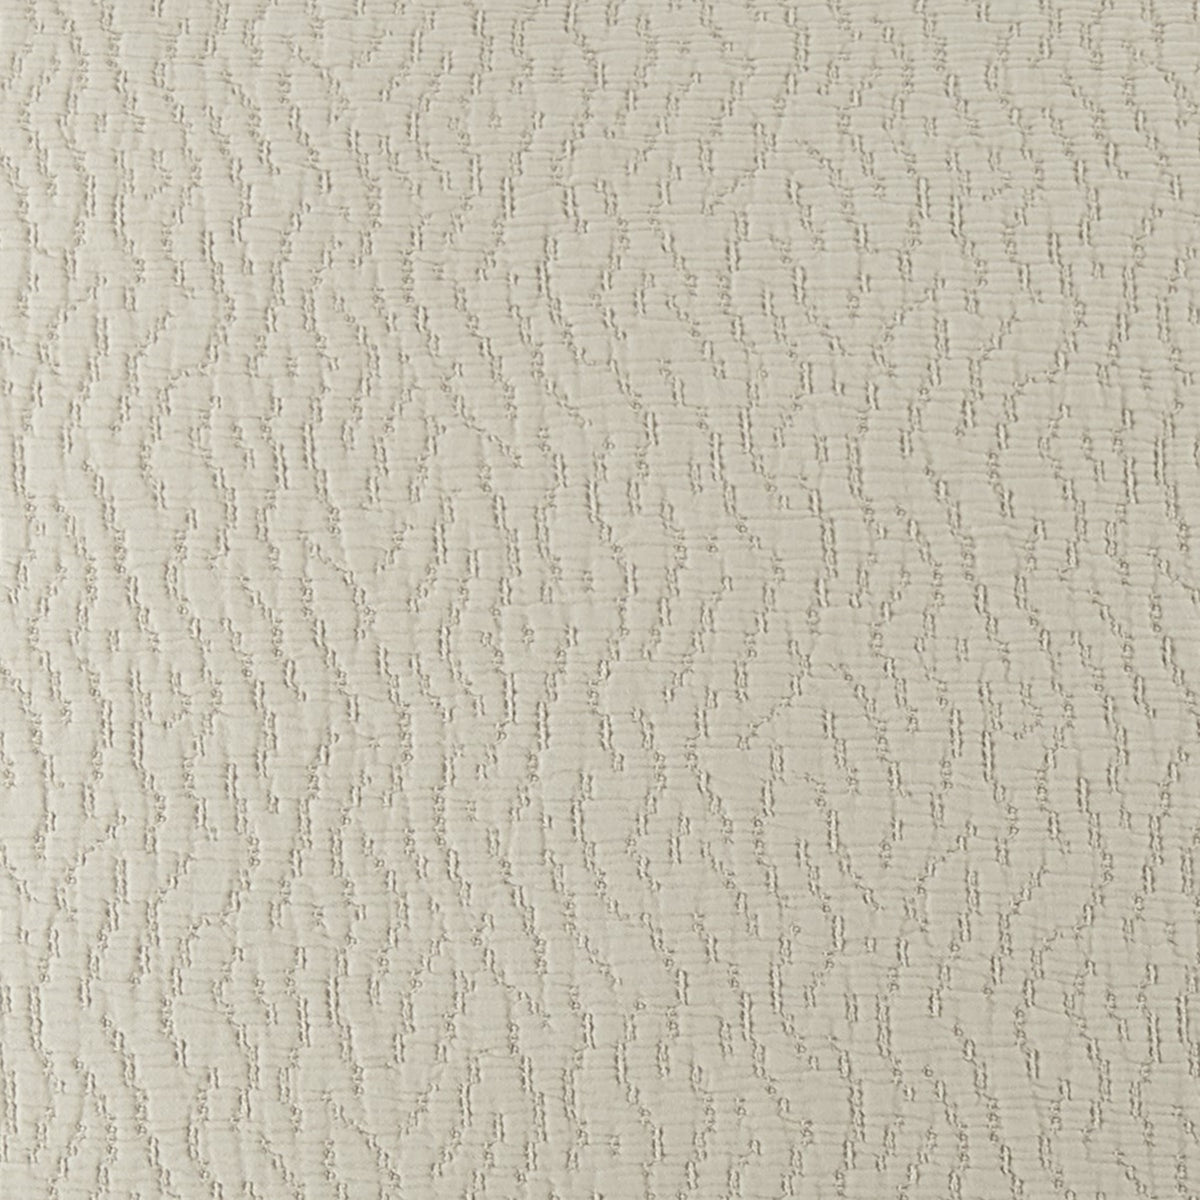 Swatch Sample of Peacock Alley Mia Stonewashed Matelassé Bedding in Color Dune